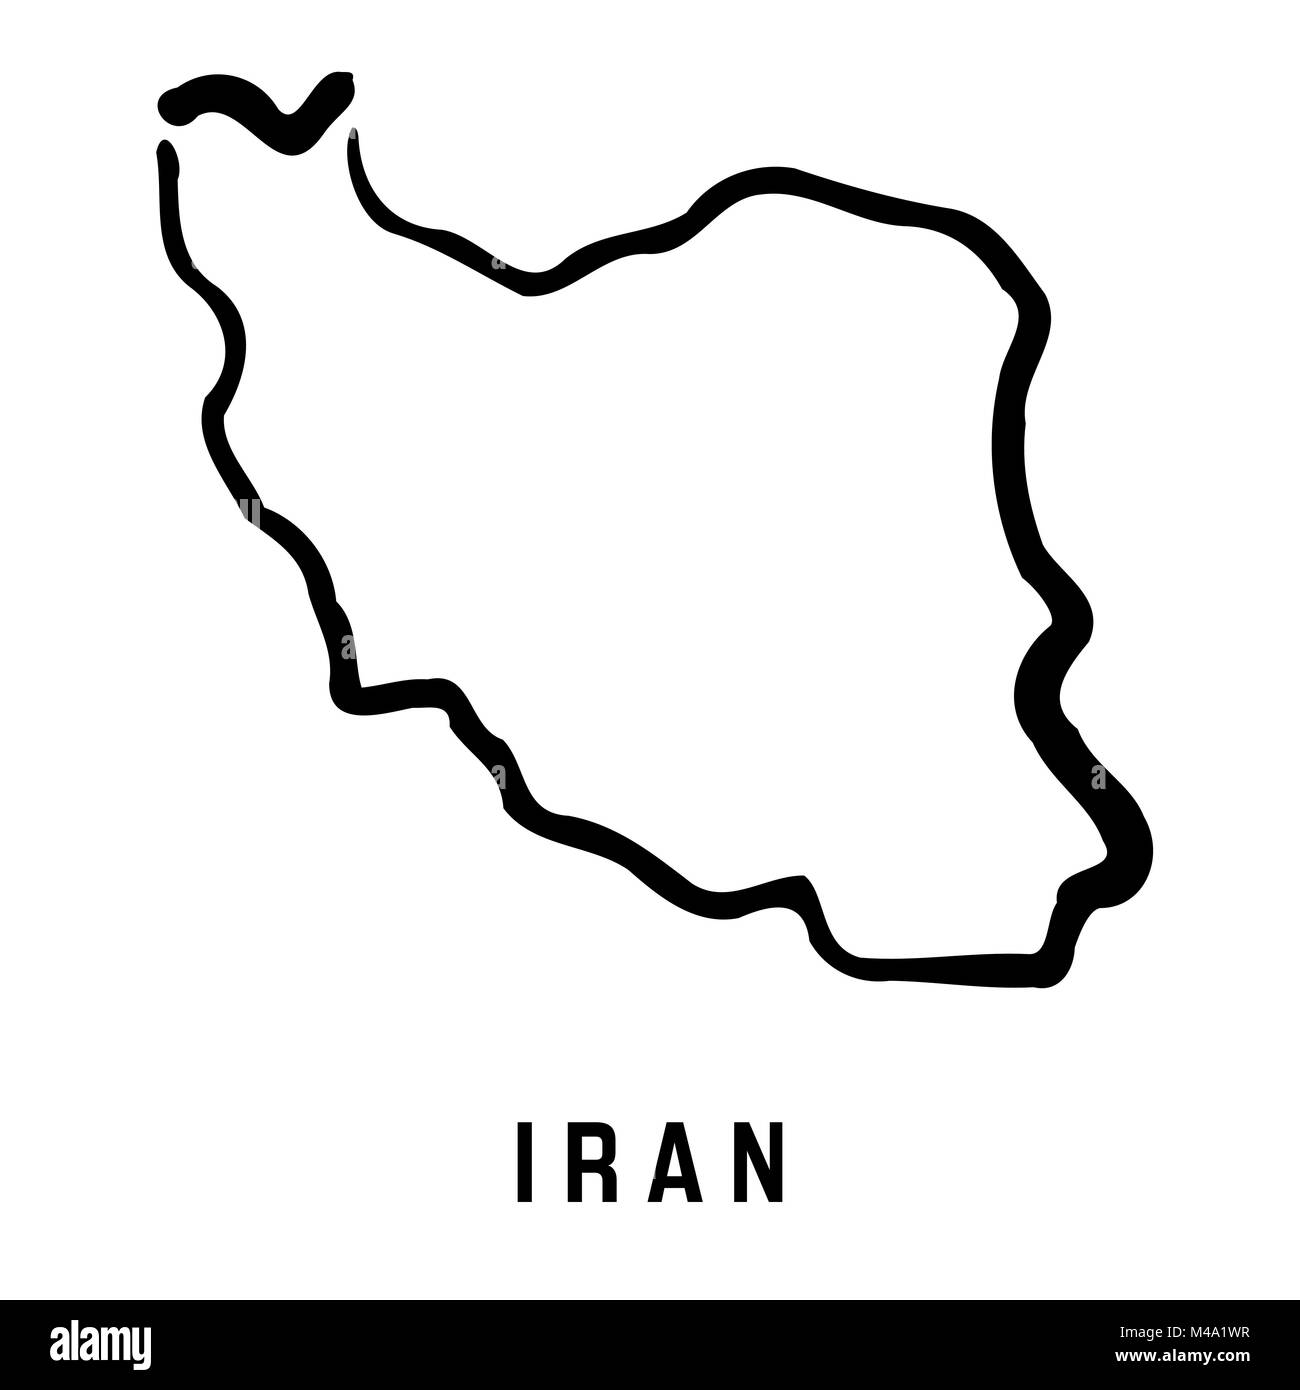 Iran simple map outline - smooth simplified country shape map vector. Stock Vector